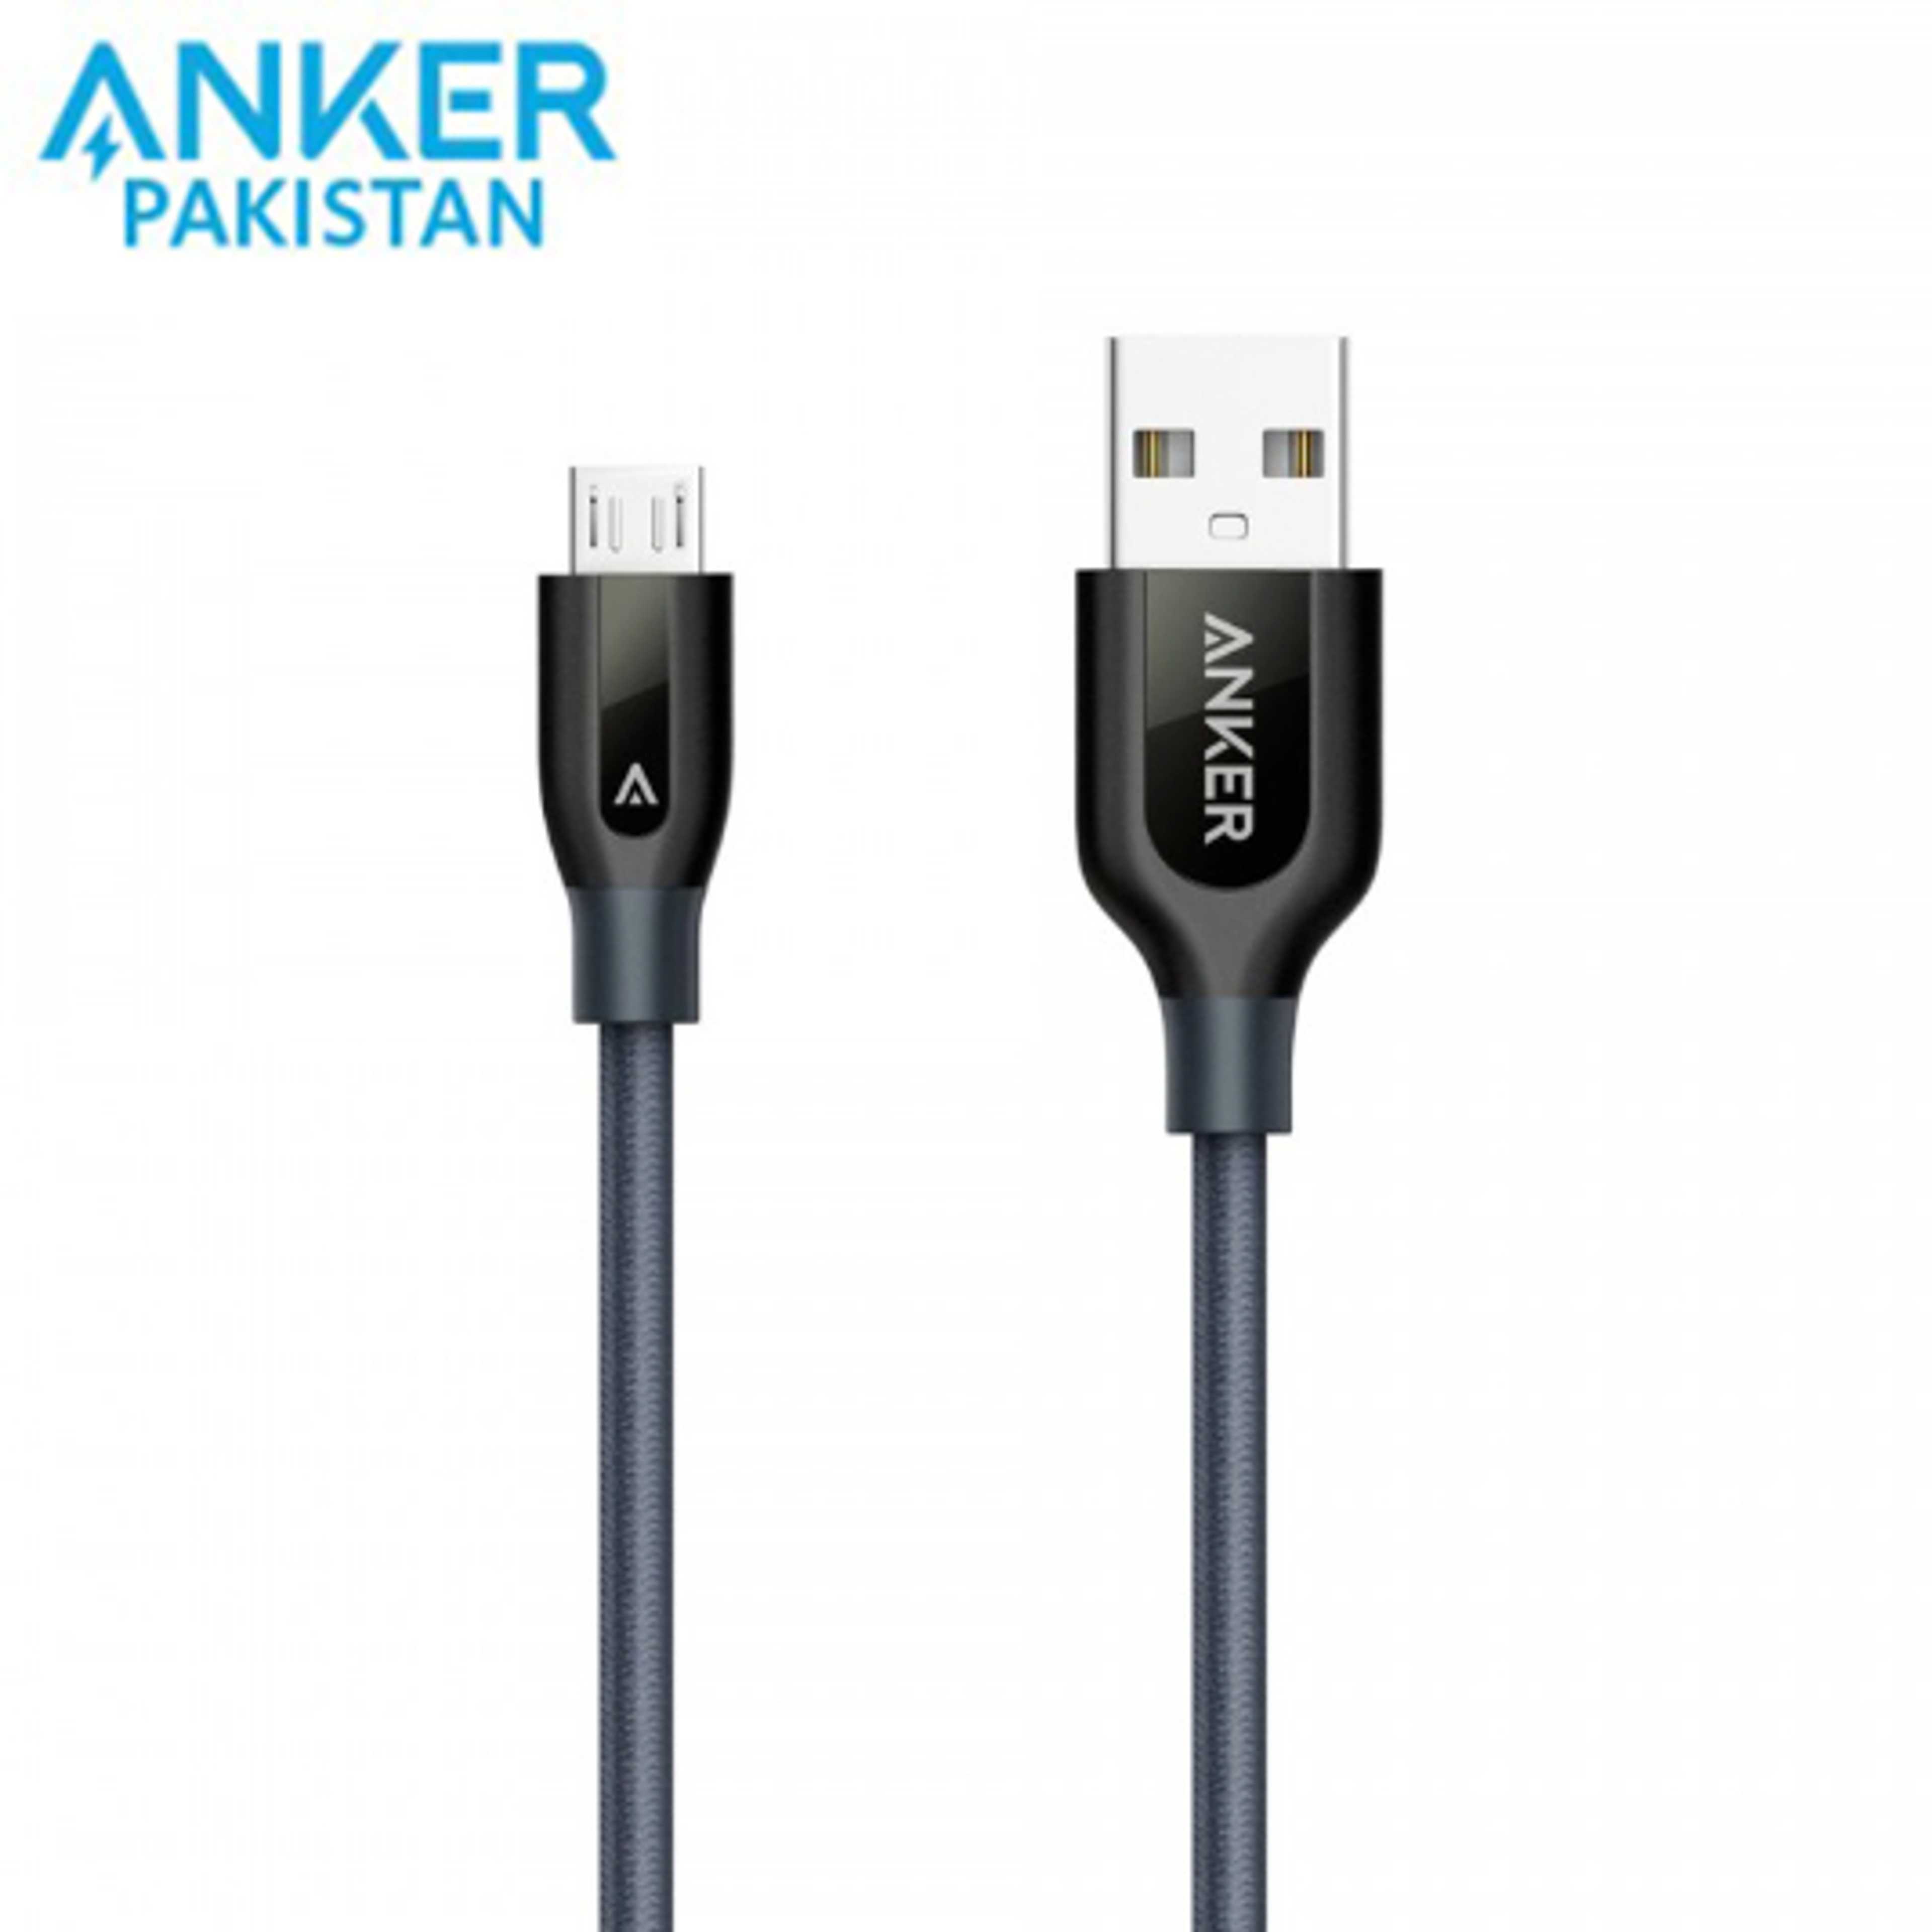 Anker A8142HA1 - PowerLine+ Micro USB Cable - 3ft